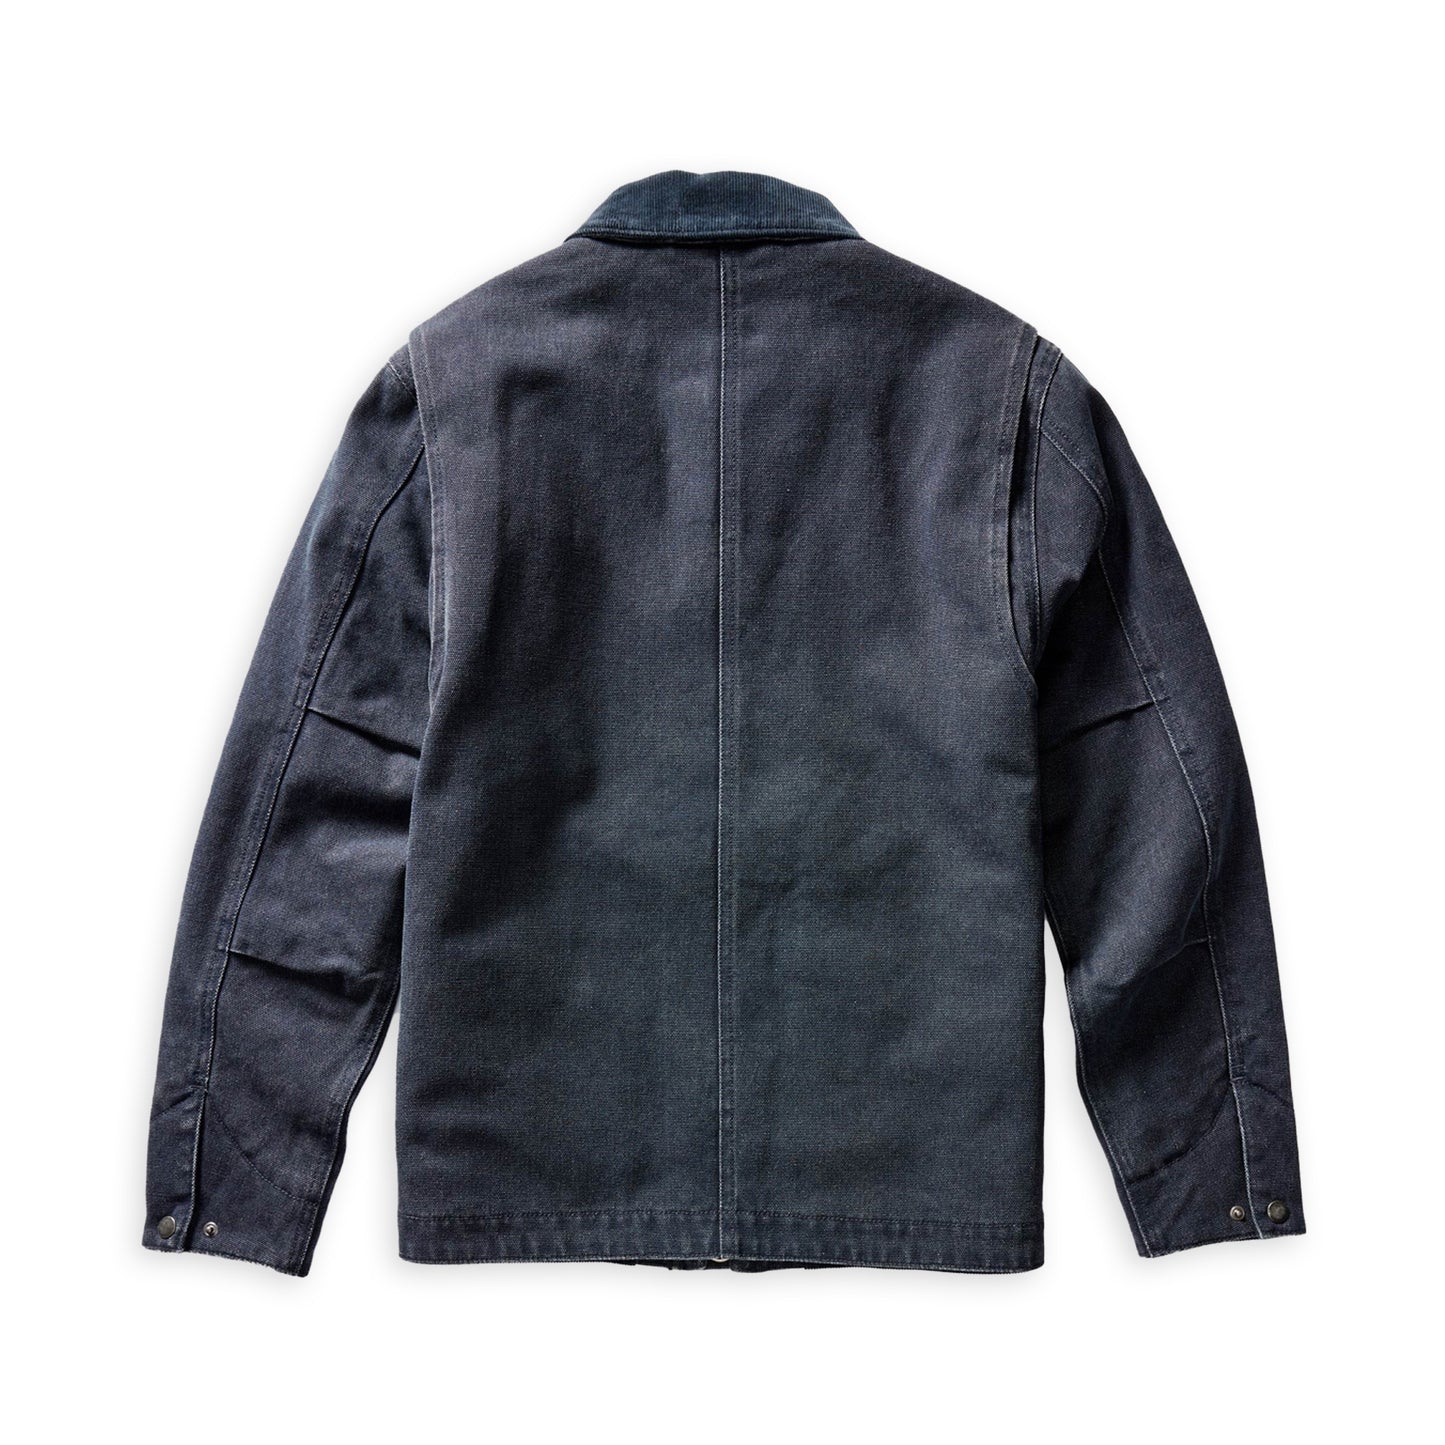 Taylor Stitch Chipped Canvas Workhorse Jacket